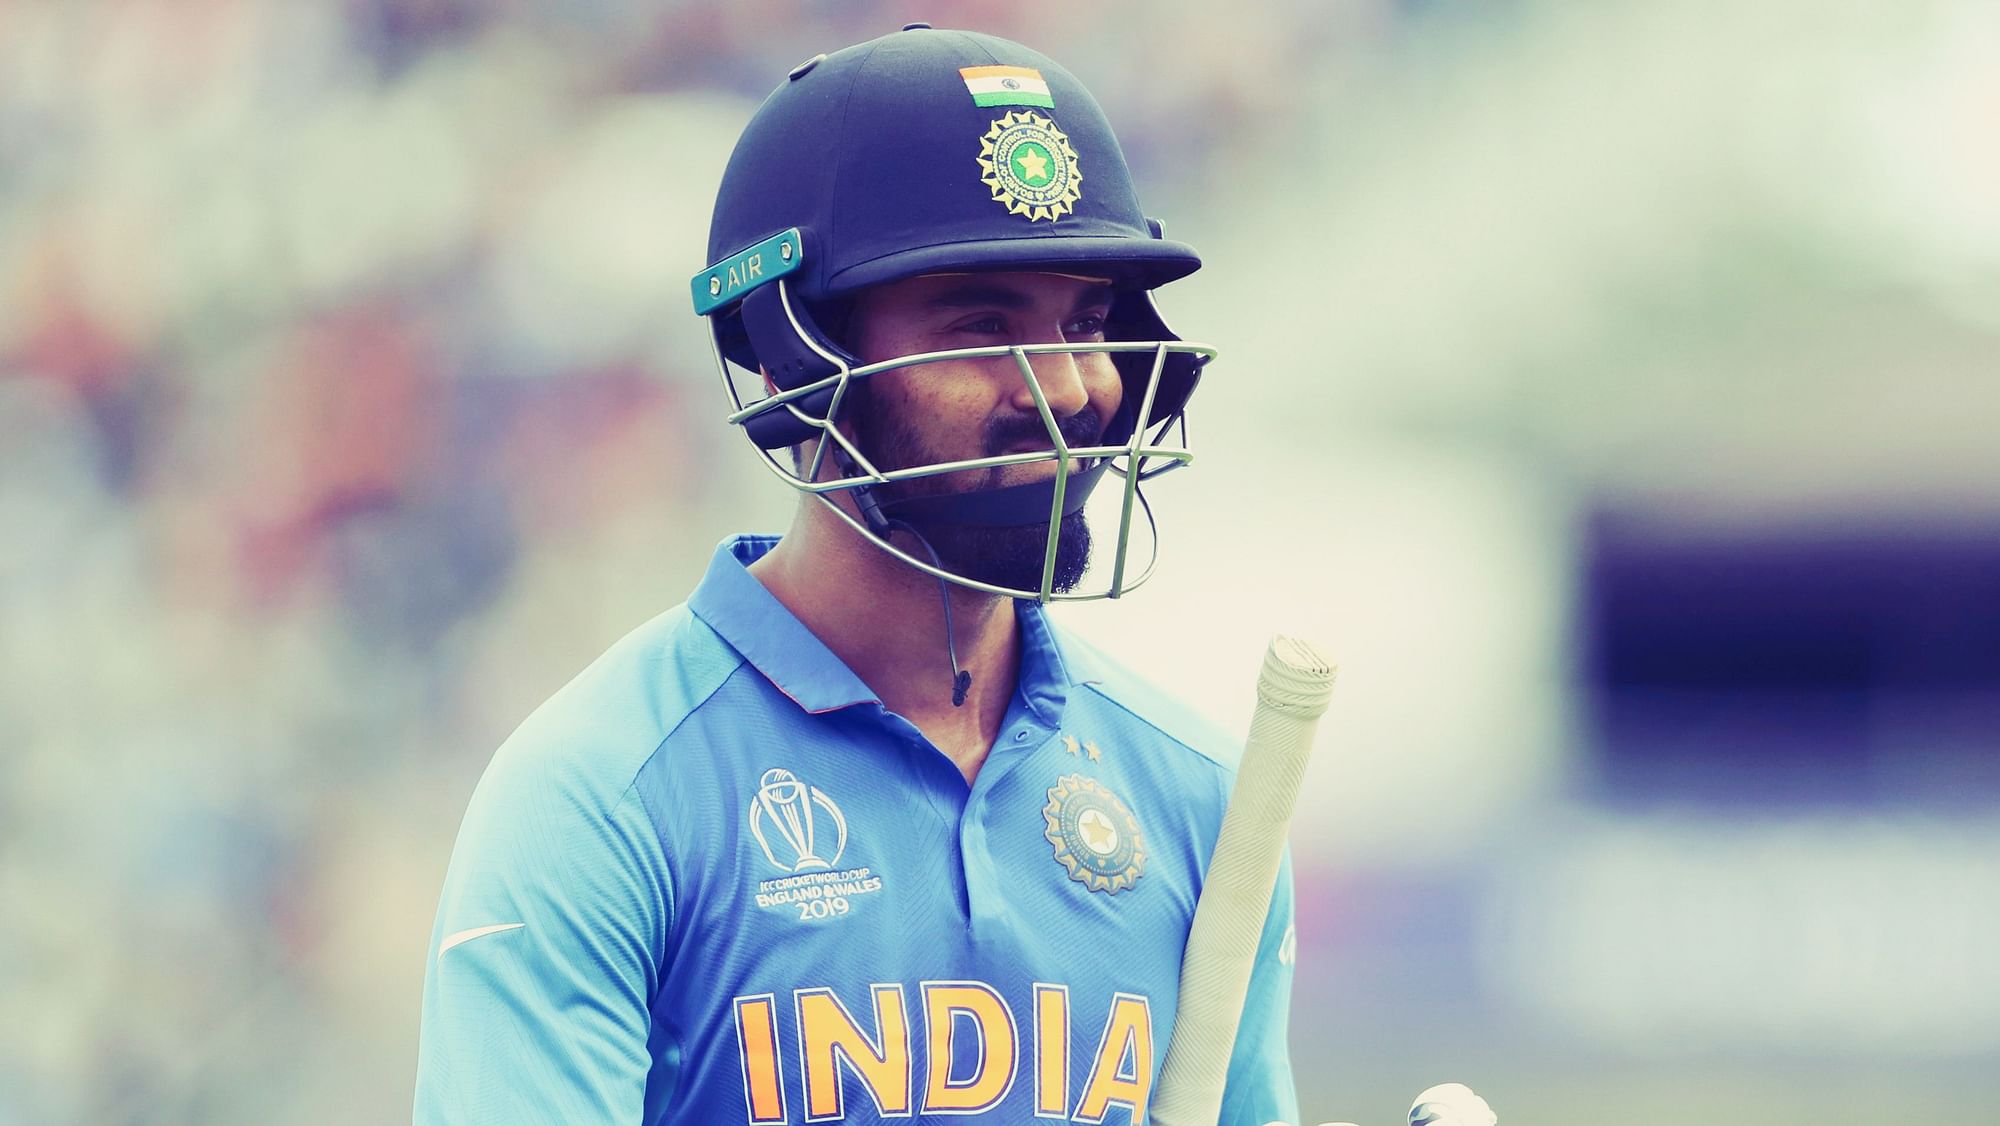 KL Rahul has been an enigma that no one has been able to solve or understand in Indian cricket.